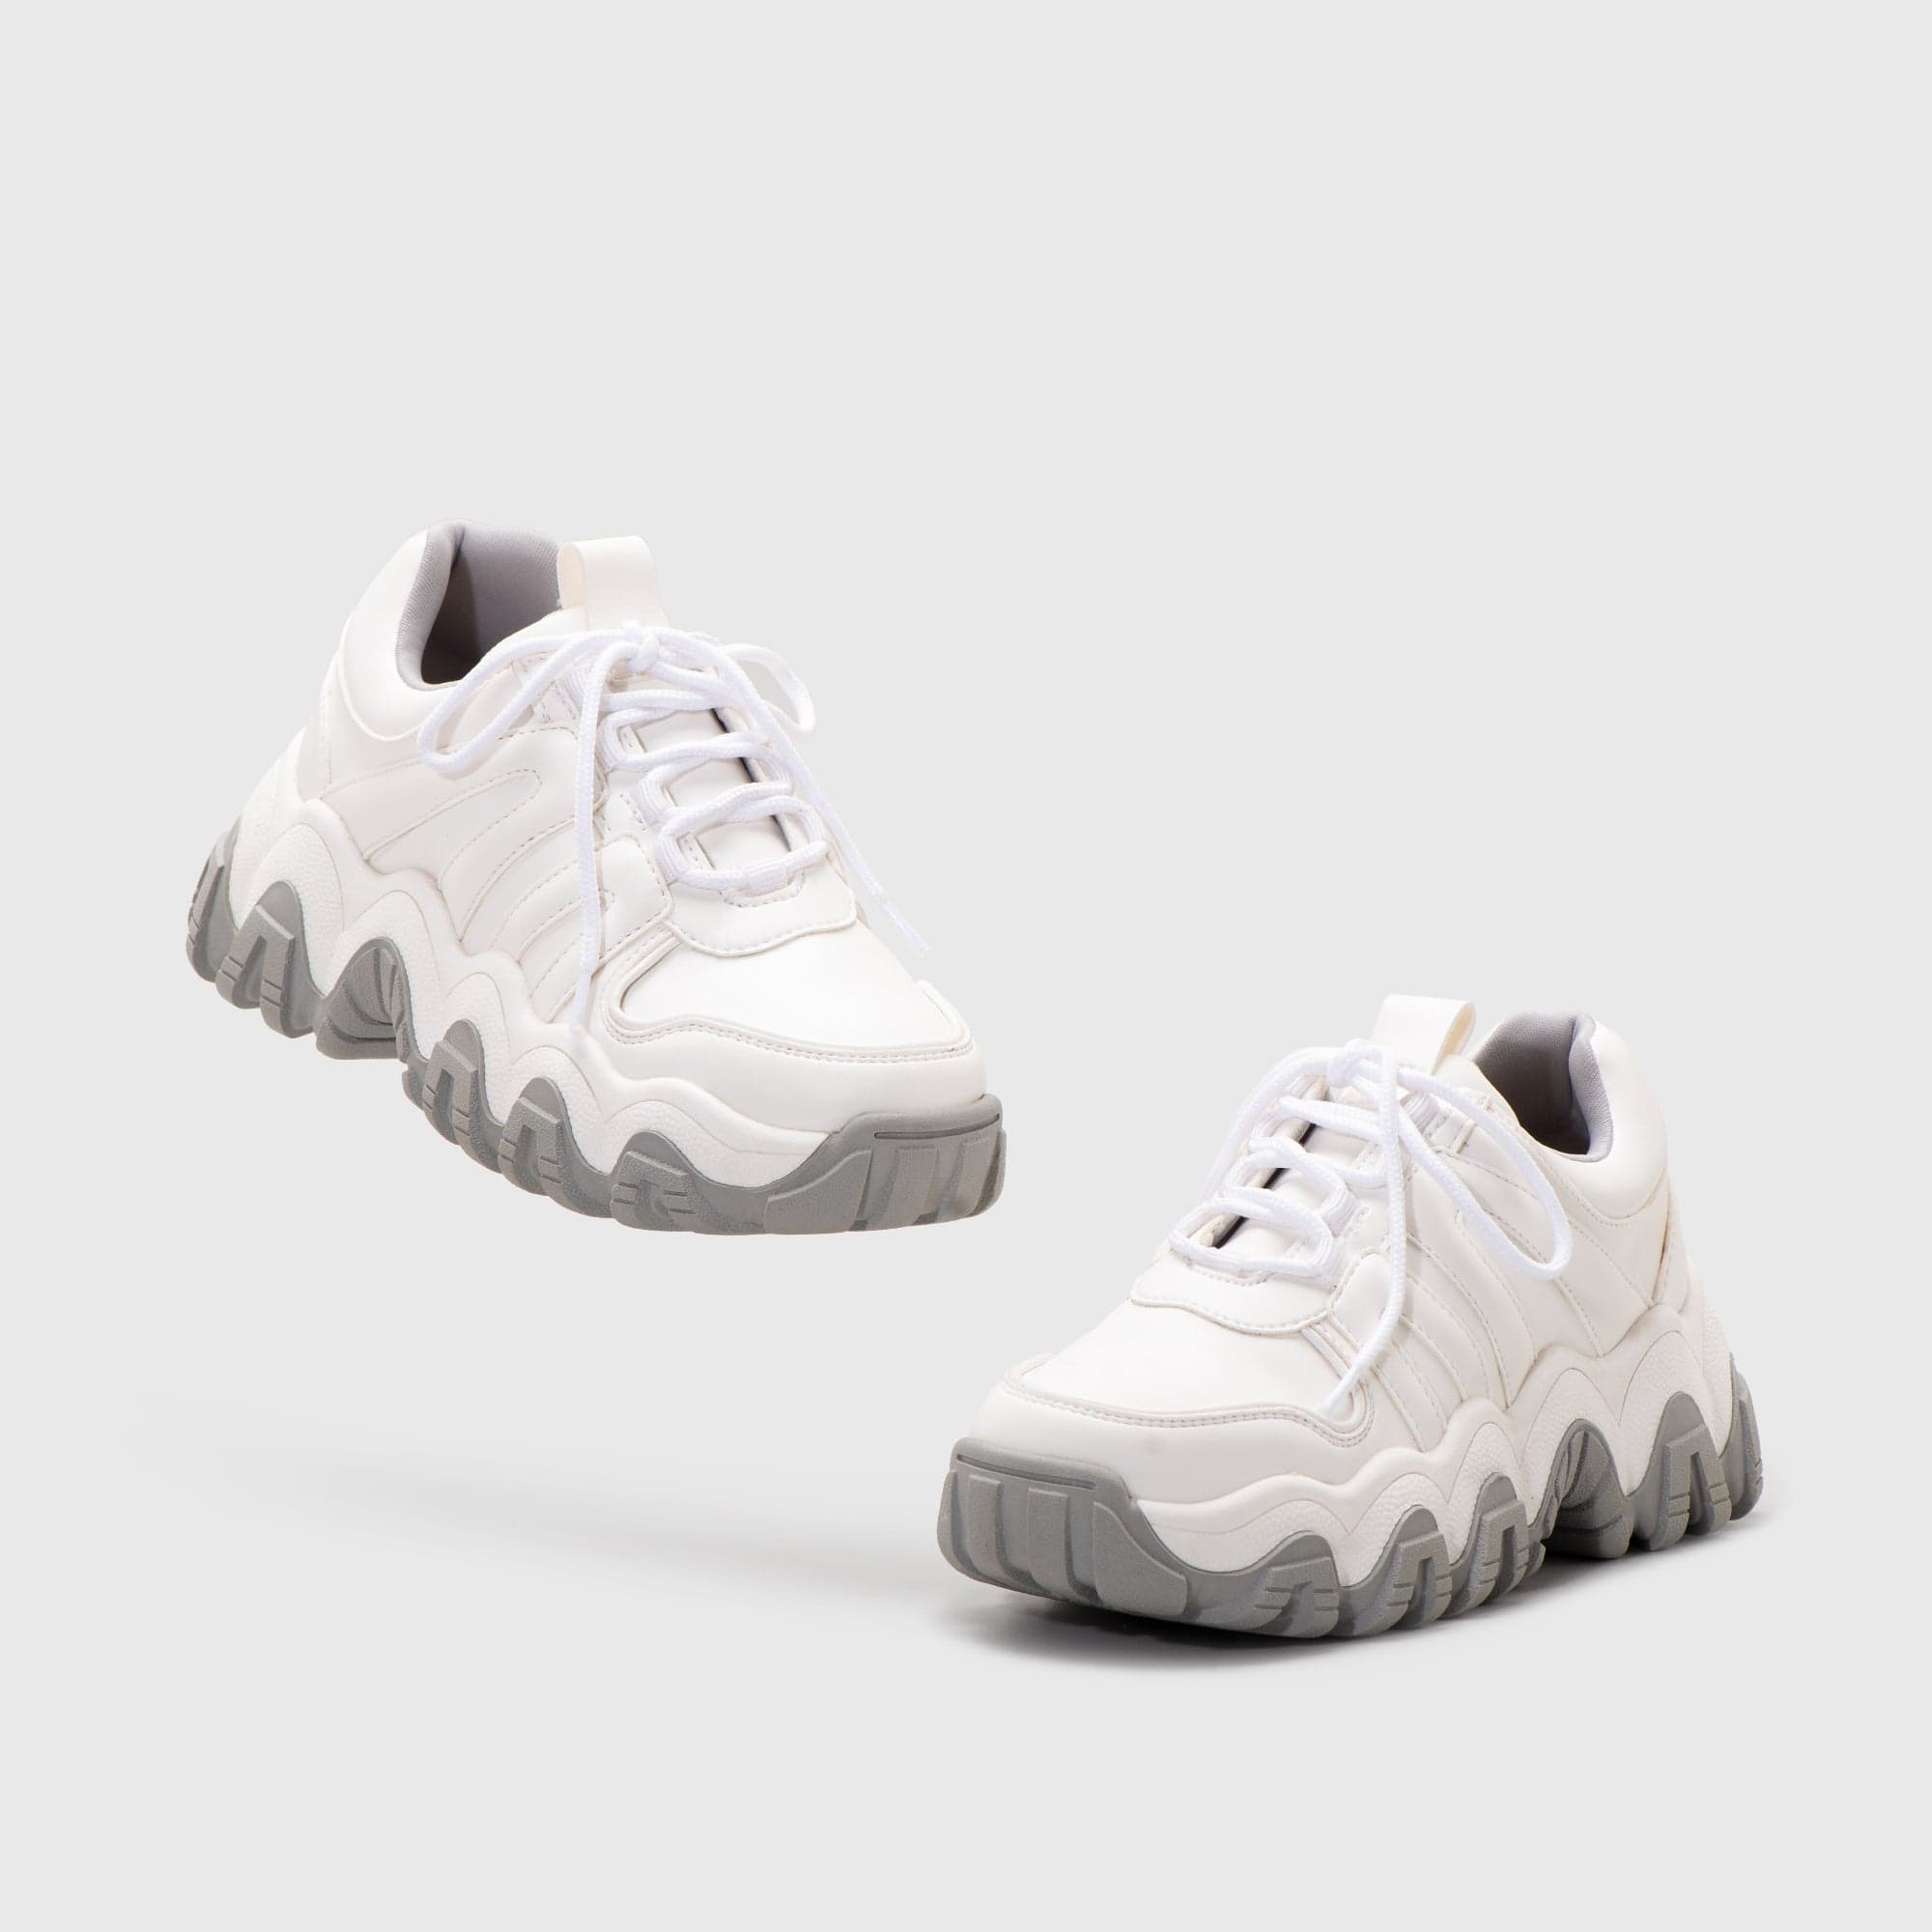 Adorable Projects Official Adorableprojects - Veraza Sneakers Light Grey - Sneakers Putih